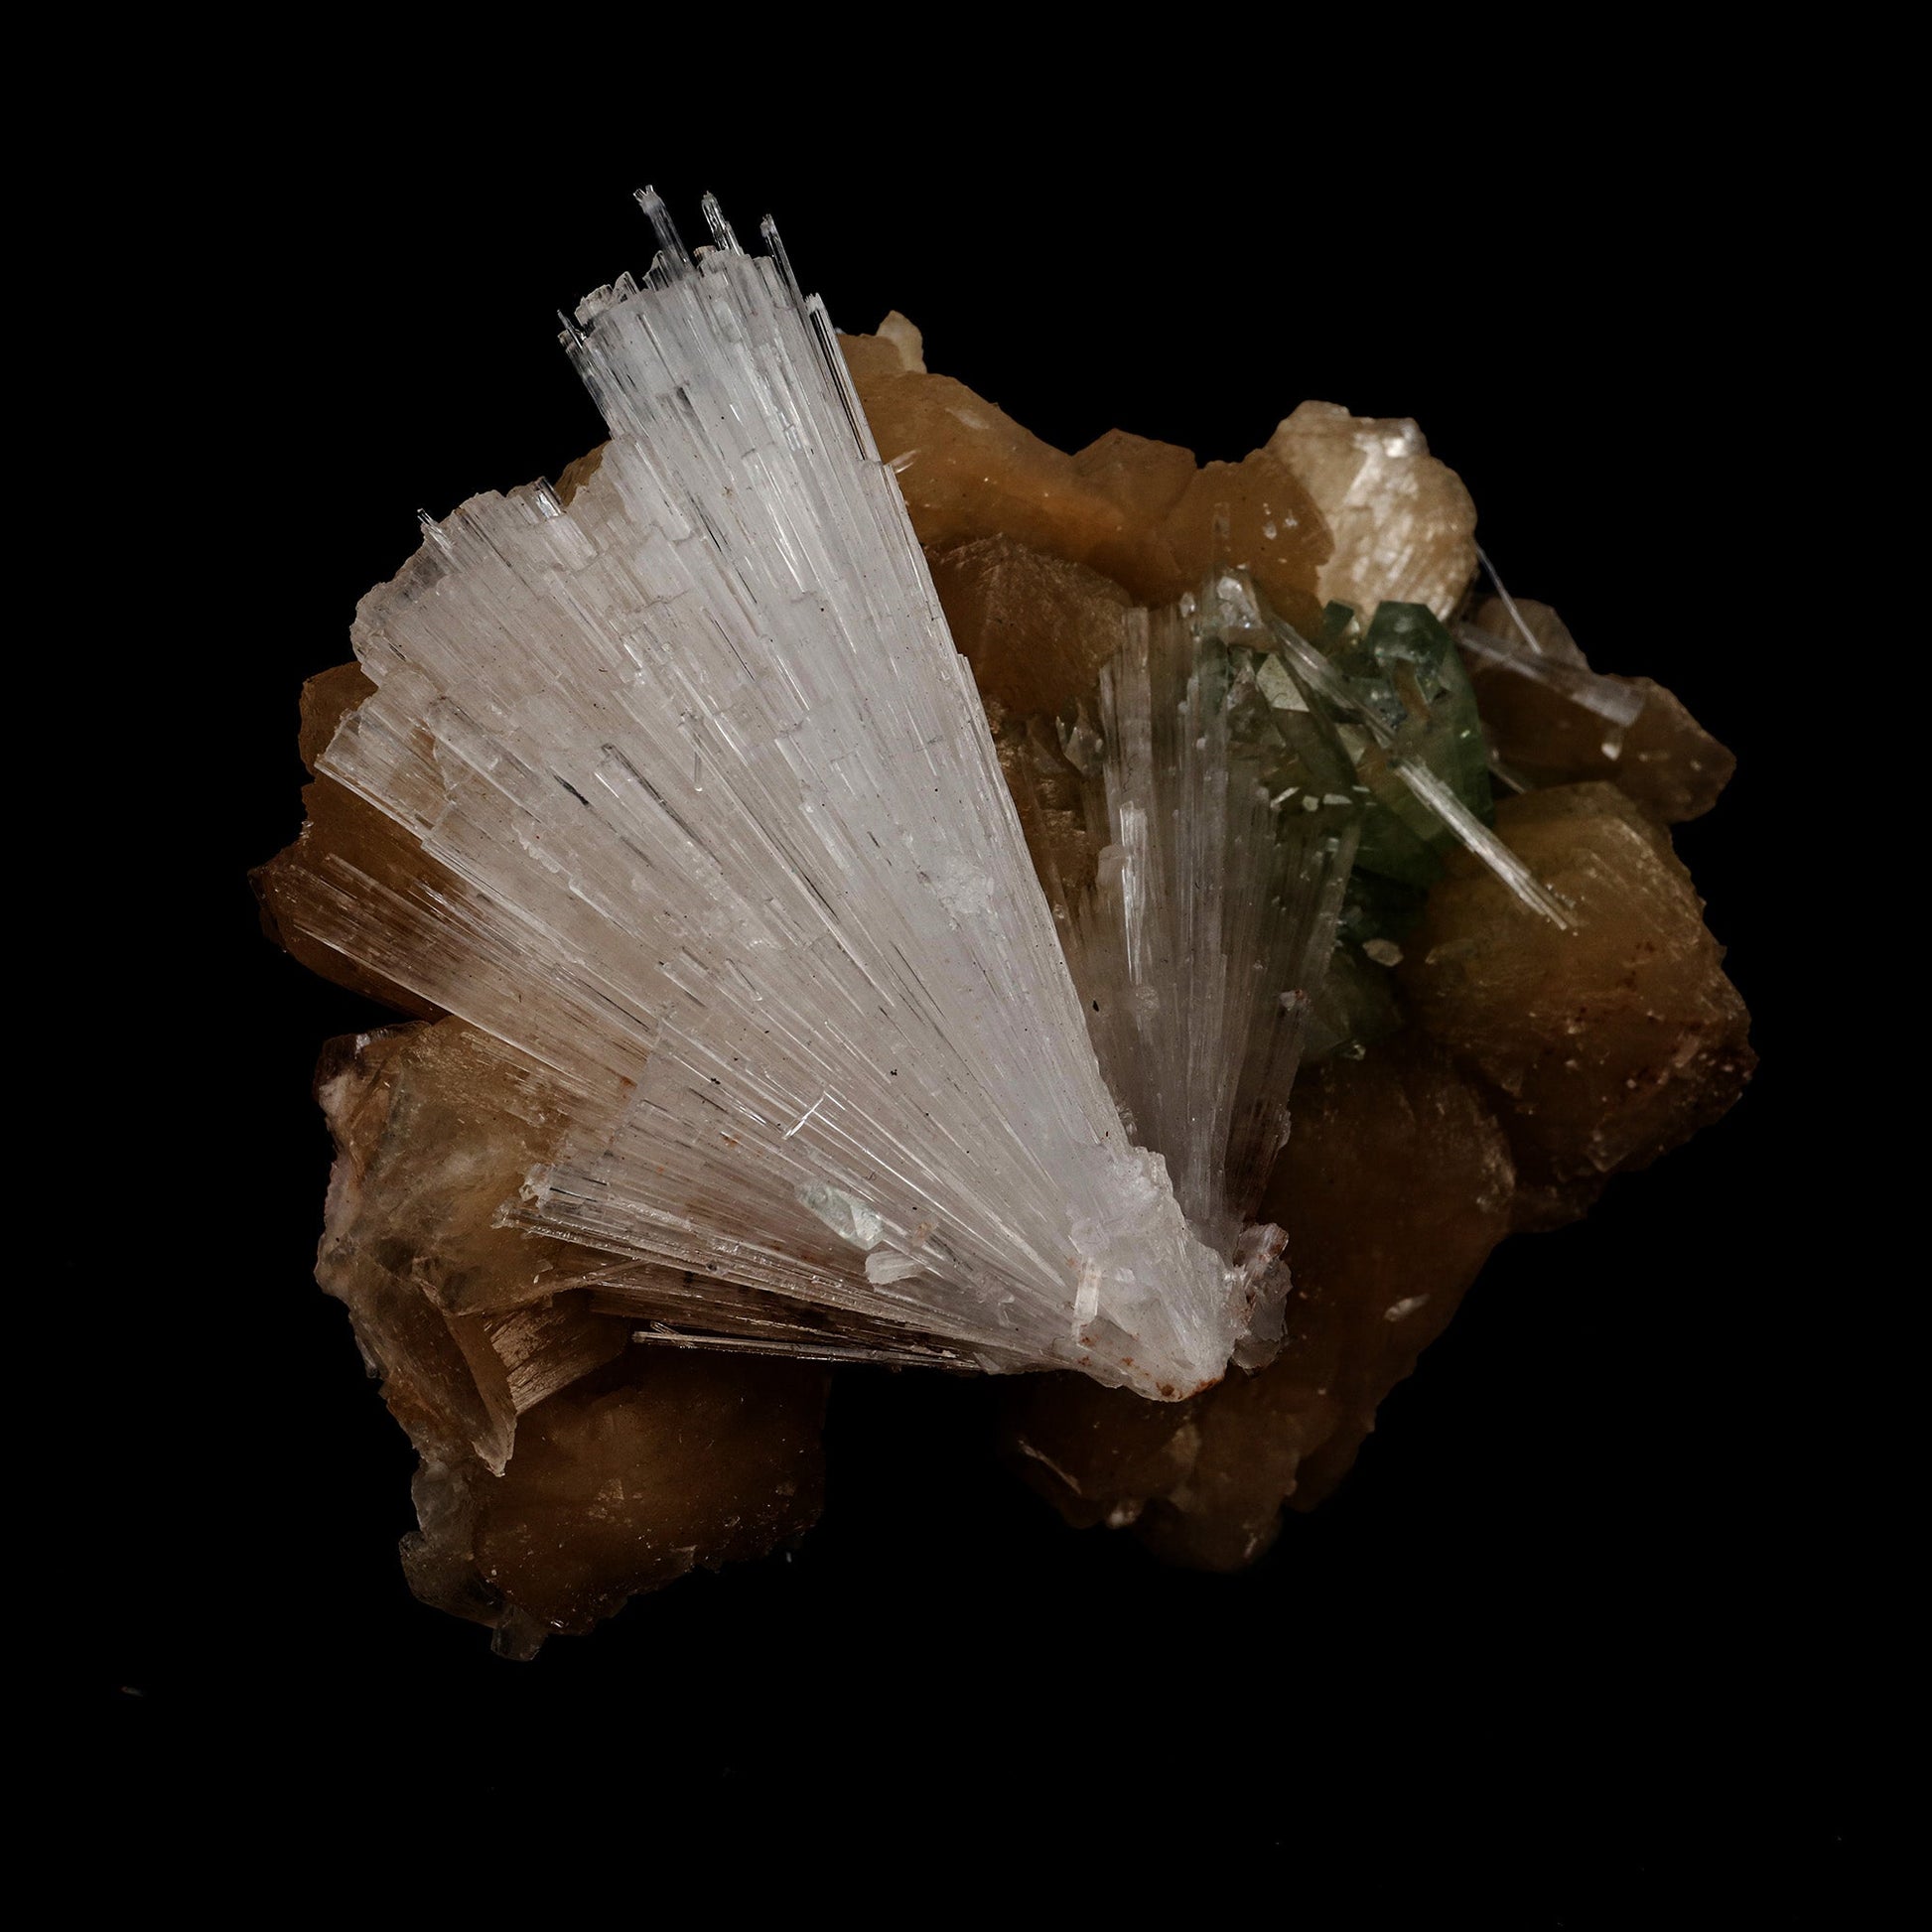 Scolecite Sprays with Green Apophyllite on Stilbite Natural Mineral Sp…  https://www.superbminerals.us/products/scolecite-sprays-with-green-apophyllite-on-stilbite-natural-mineral-specimen-b-5250  Features: A group of thin scolecite crystals with an elongated prism and transparence in the terminal crystal area. They form radial aggregates penetrating apophyllite crystals and disposed randomly. There are tetragonal prisms and a few pyramidal faces on the top and base, along with great luster 